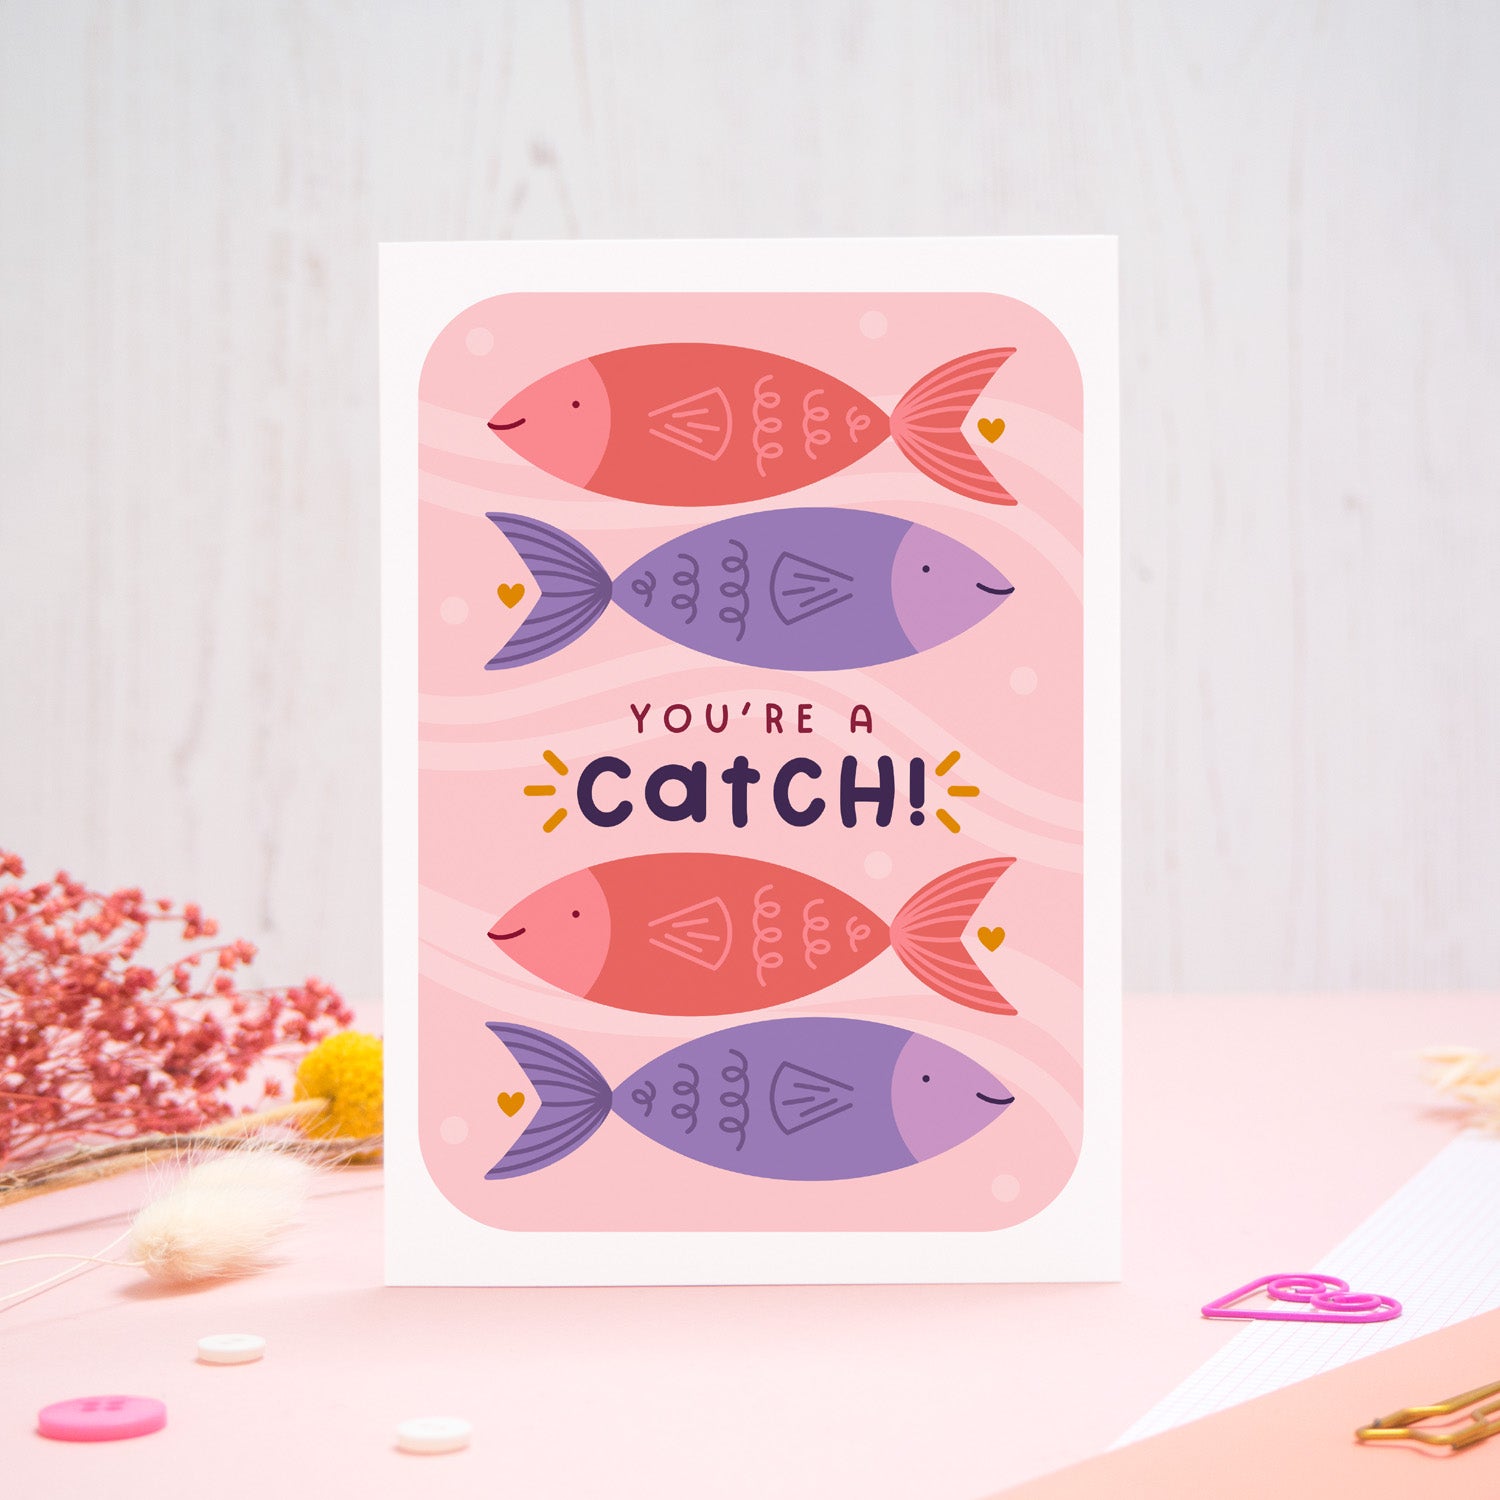 You're a catch valentine's day card featuring pink and purple fish. The card has been photographed on a pink and white background with stationery and dry flowers surrounding it.